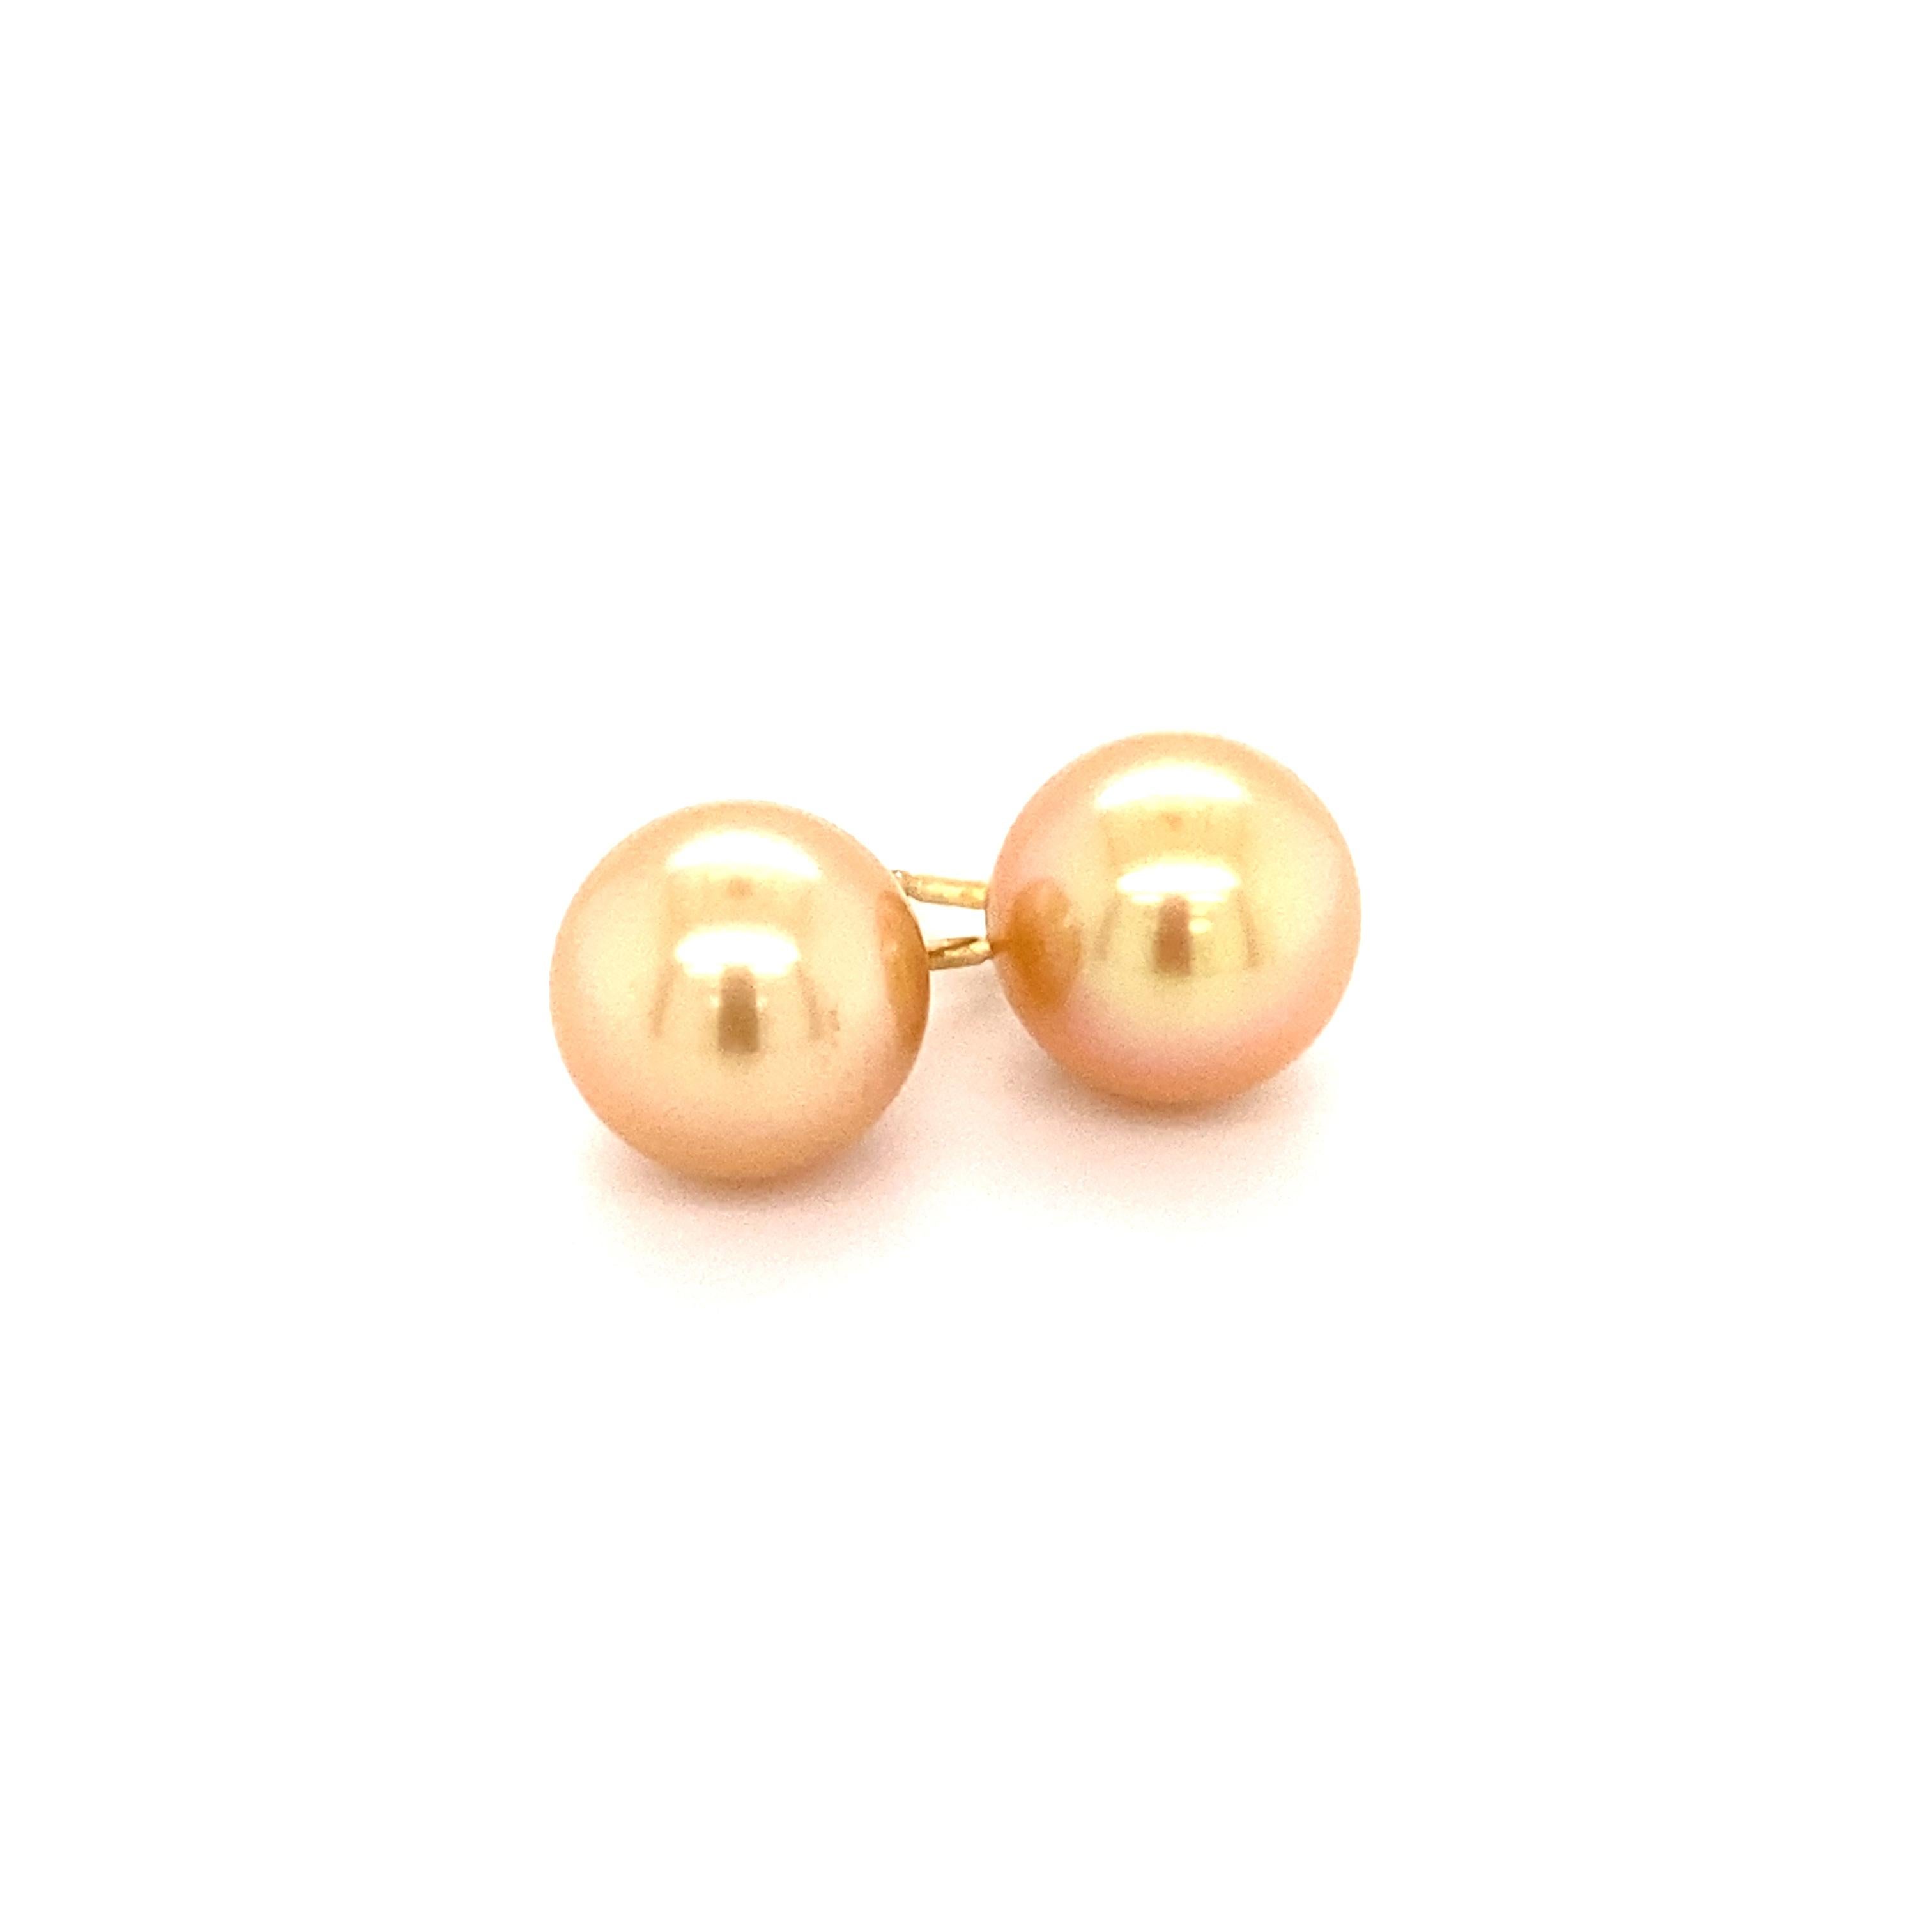 This timeless pair of earstuds is set with two fabulous, round golden South Sea cultured pearls of 11.5 mm diameter. The cultured pearls not only have a warm radiant colour, but also a very good lustre with a clean surface. The perfect pair is set